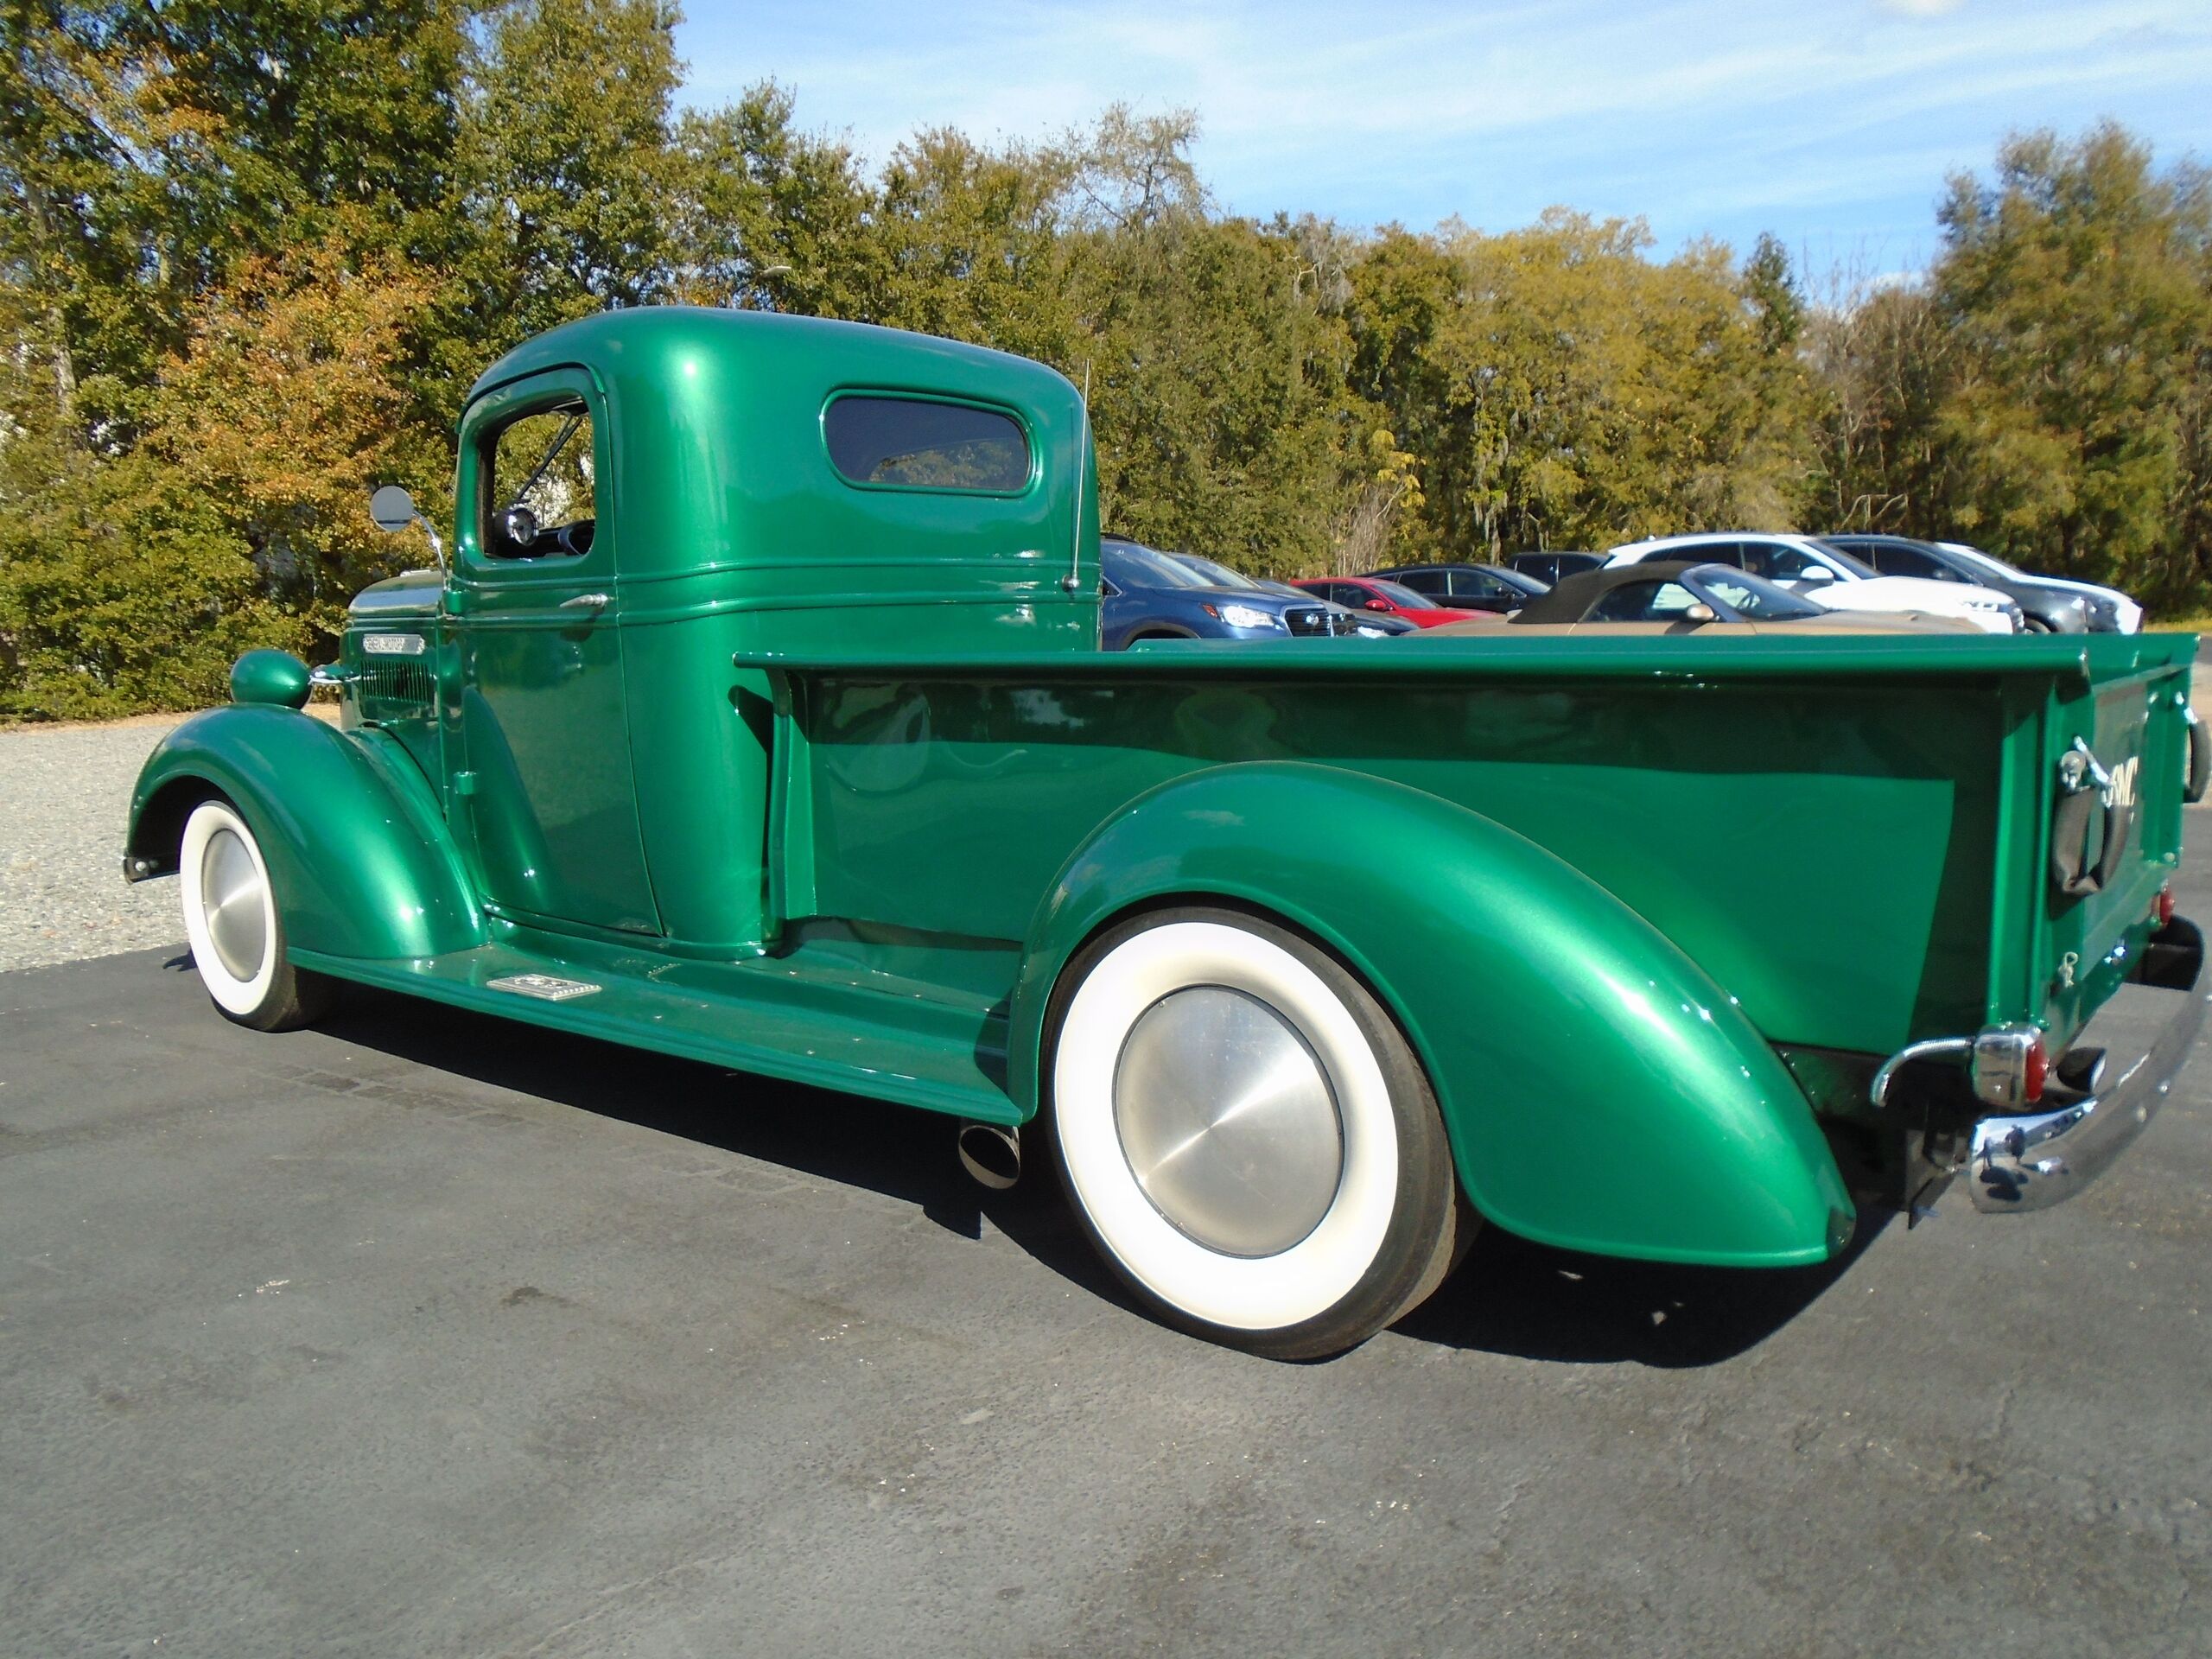 1937 GMC  Long bed  (Longbeds are rare) 7